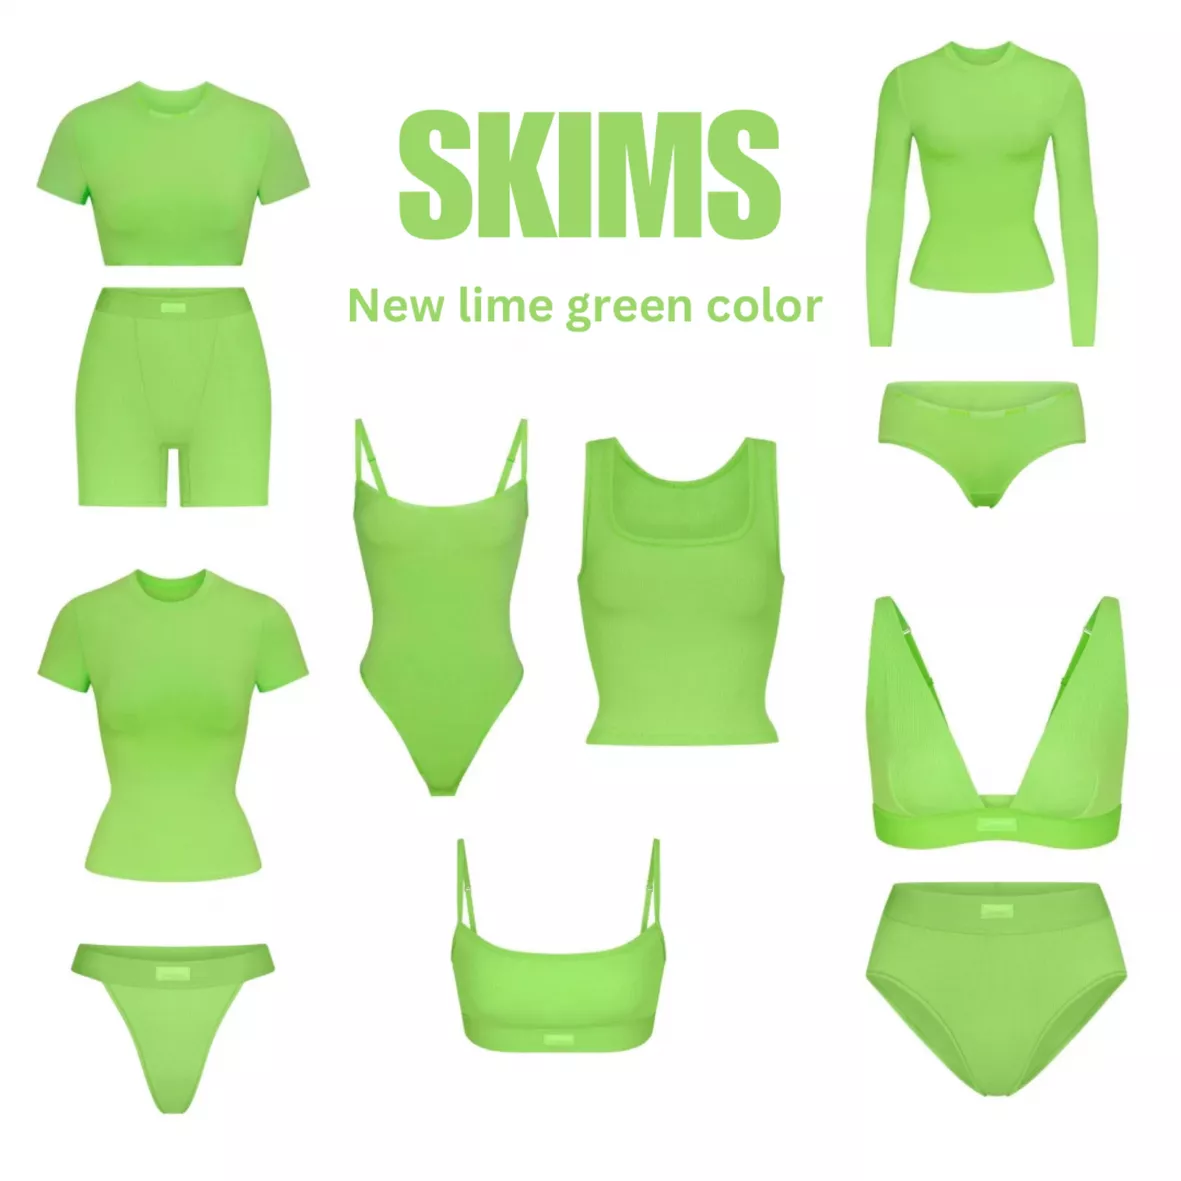 Neon Green Dreams with the new @skims Cotton Neon Green collection 💚 #skims